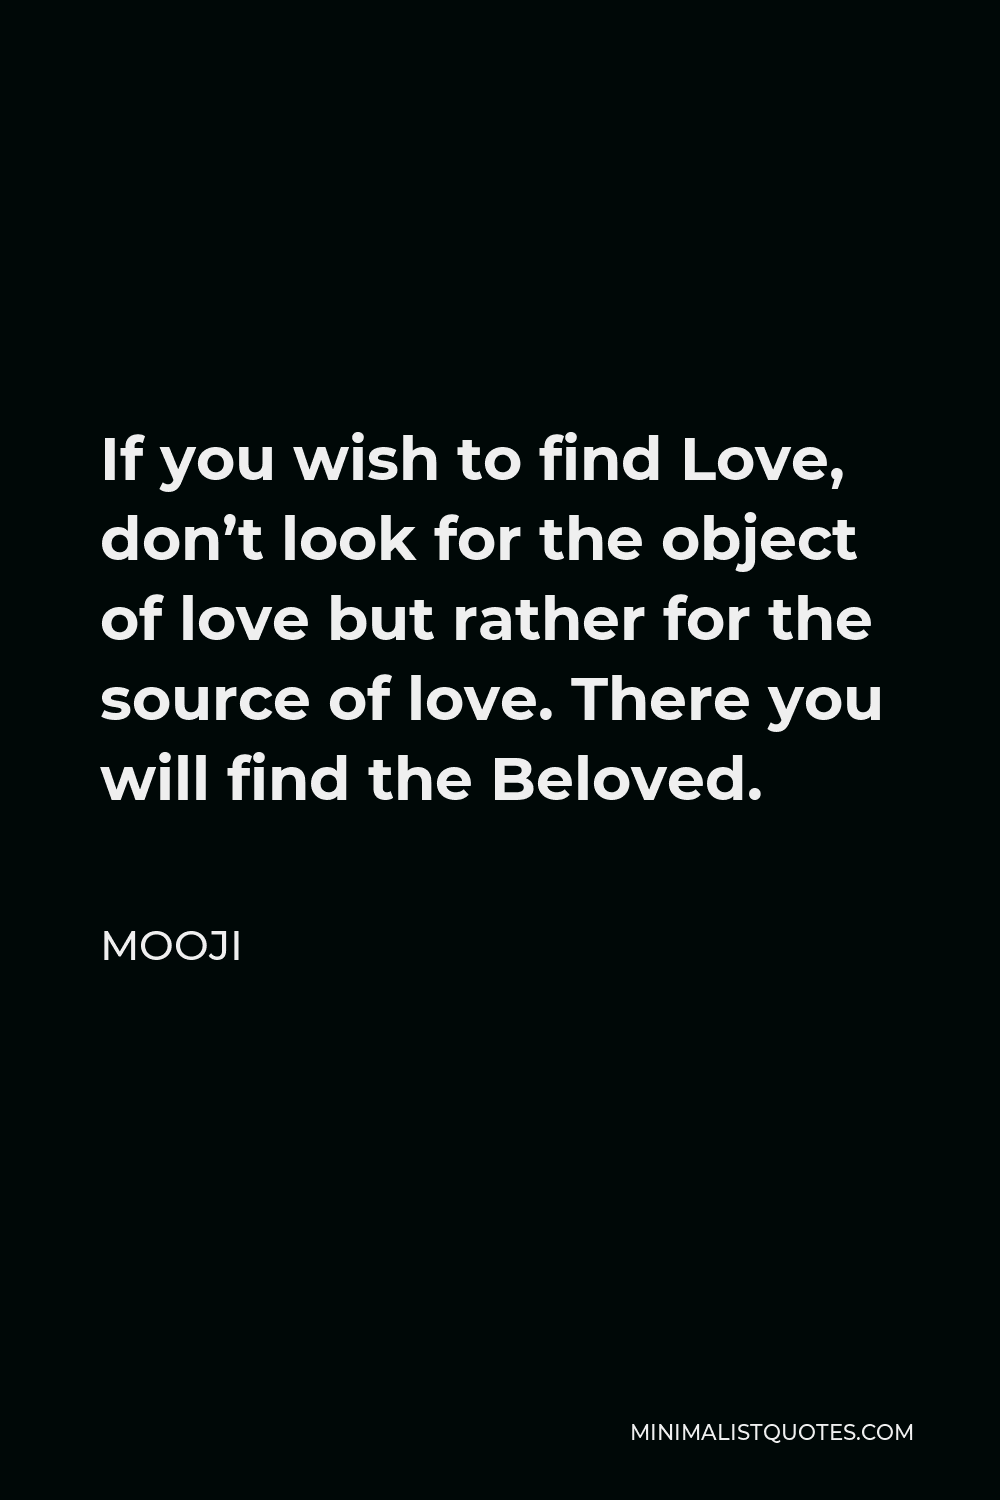 Mooji Quote - If you wish to find Love, don’t look for the object of love but rather for the source of love. There you will find the Beloved.